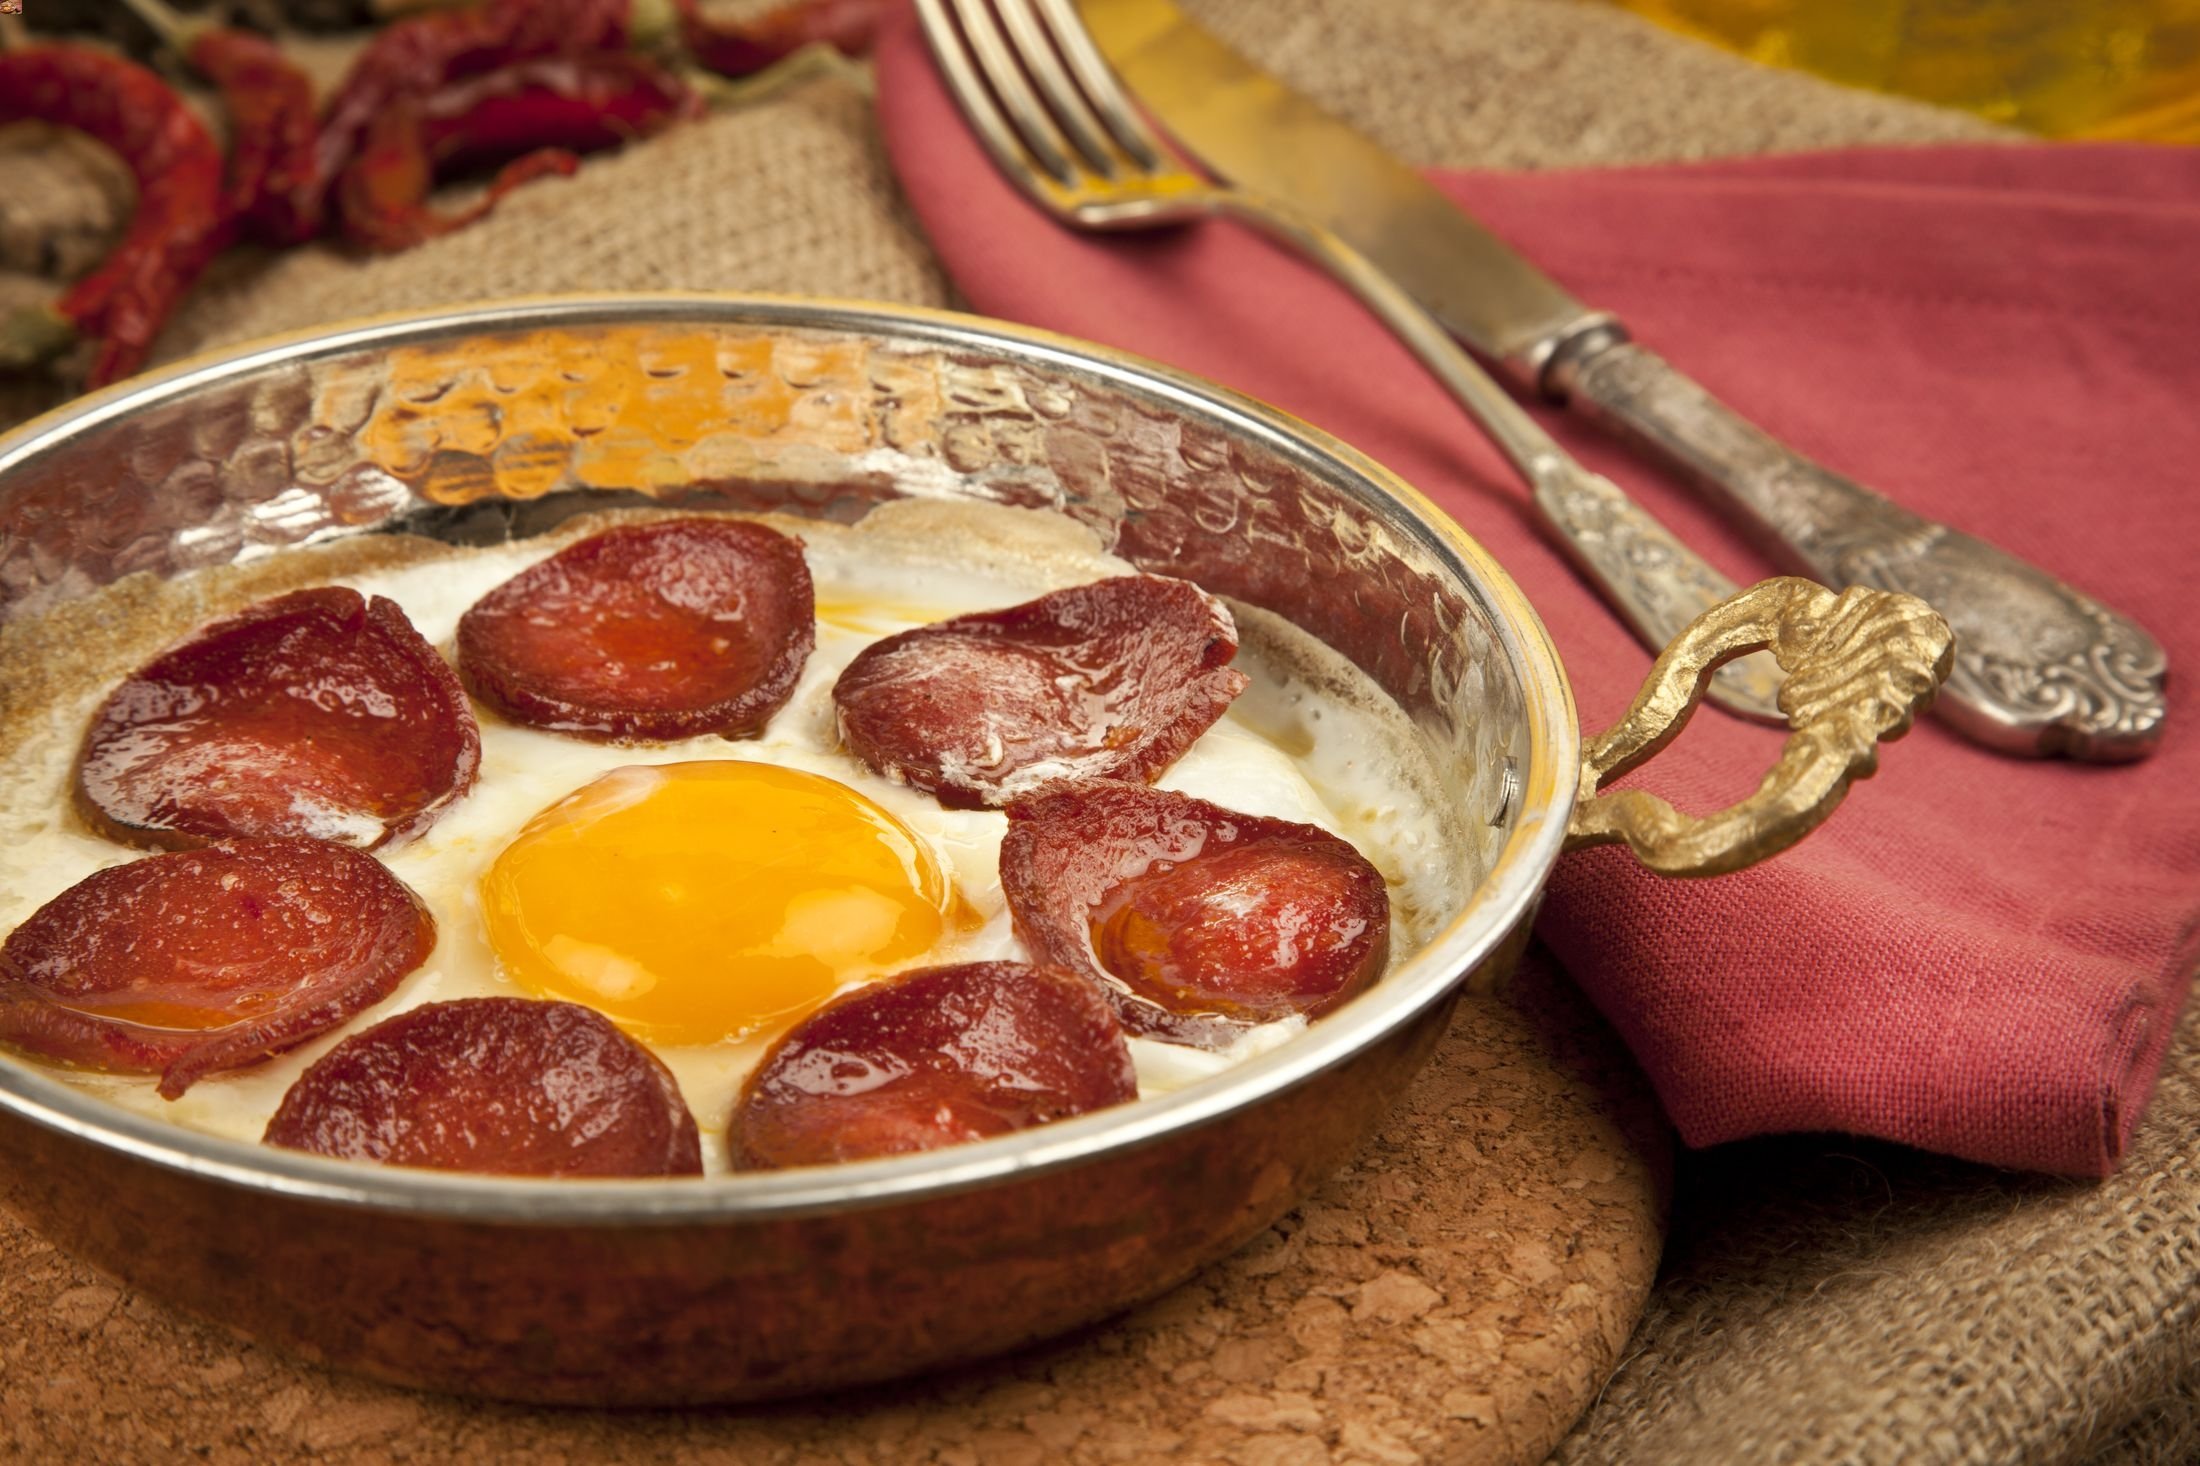 Scrambled eggs with little half-moon slices or Türkiye's spiced sucuk sausage is one of the most favorite Turkish egg dishes out there.  (Shutterstock Photo)